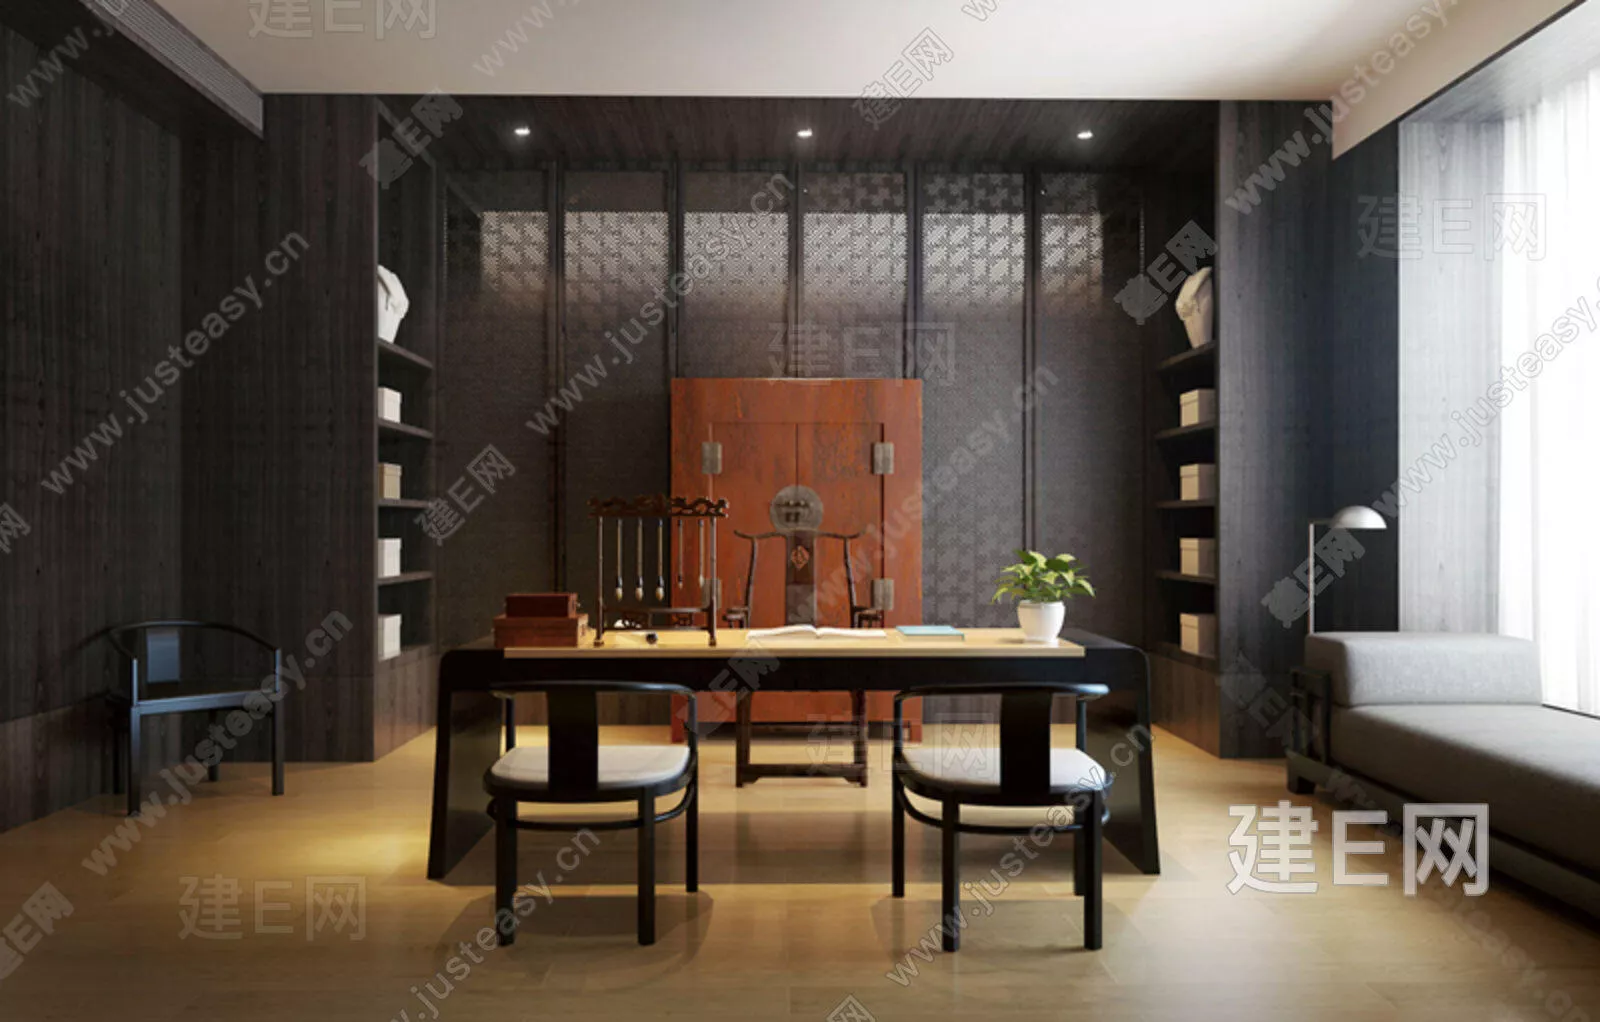 CHINESE STUDY ROOM - SKETCHUP 3D SCENE - ENSCAPE - 112872818